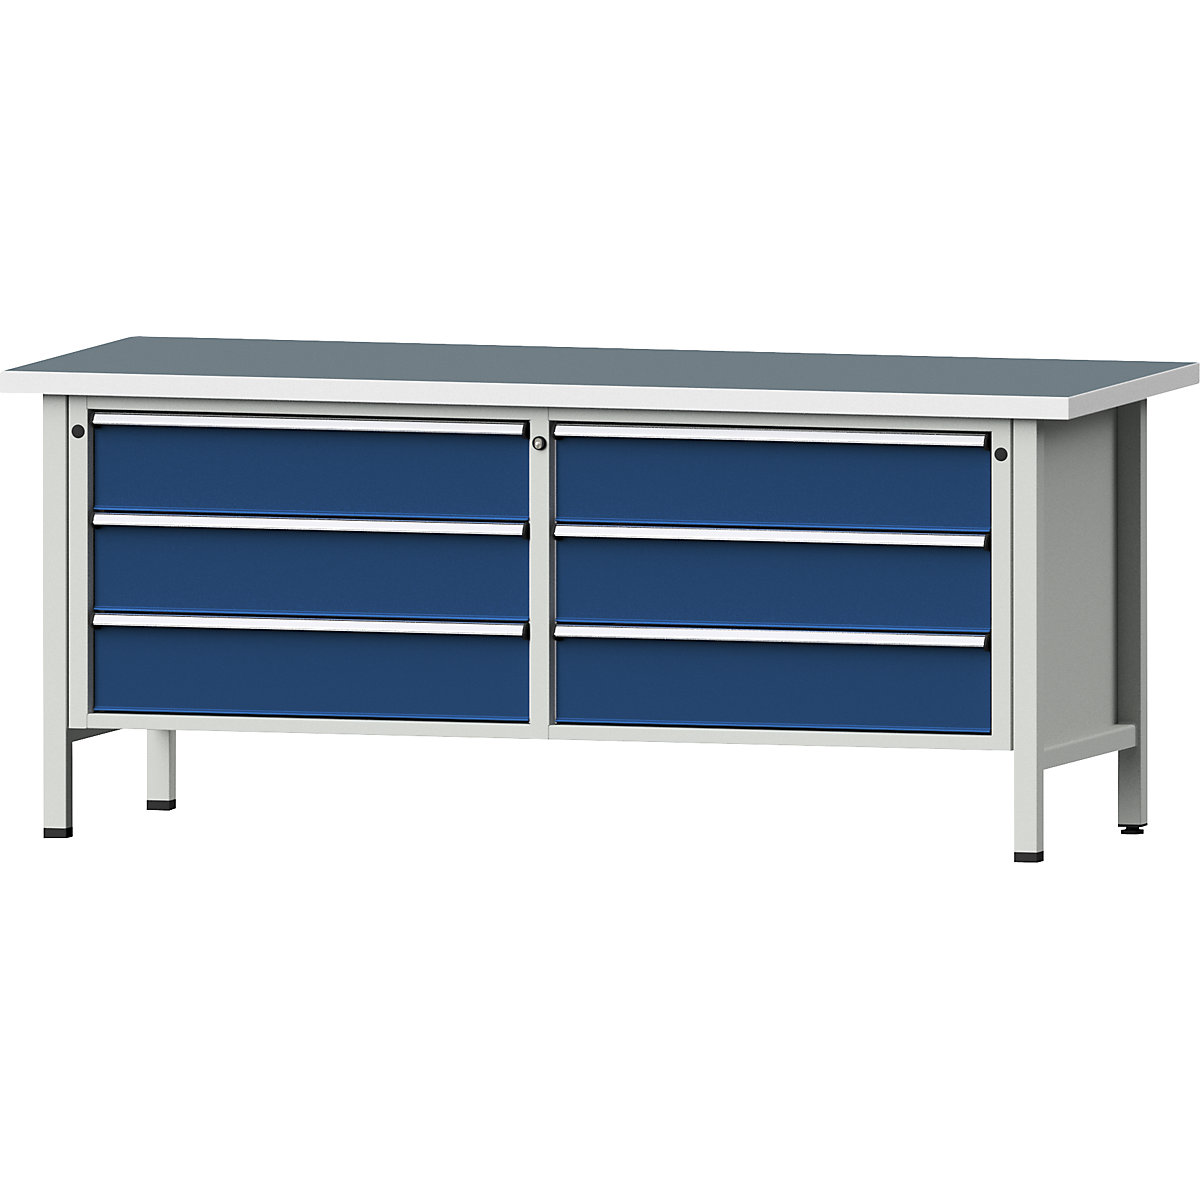 Workbench with XL/XXL drawers, frame construction – ANKE, width 2000 mm, 6 x 180 mm drawers, universal worktop, front in gentian blue-11